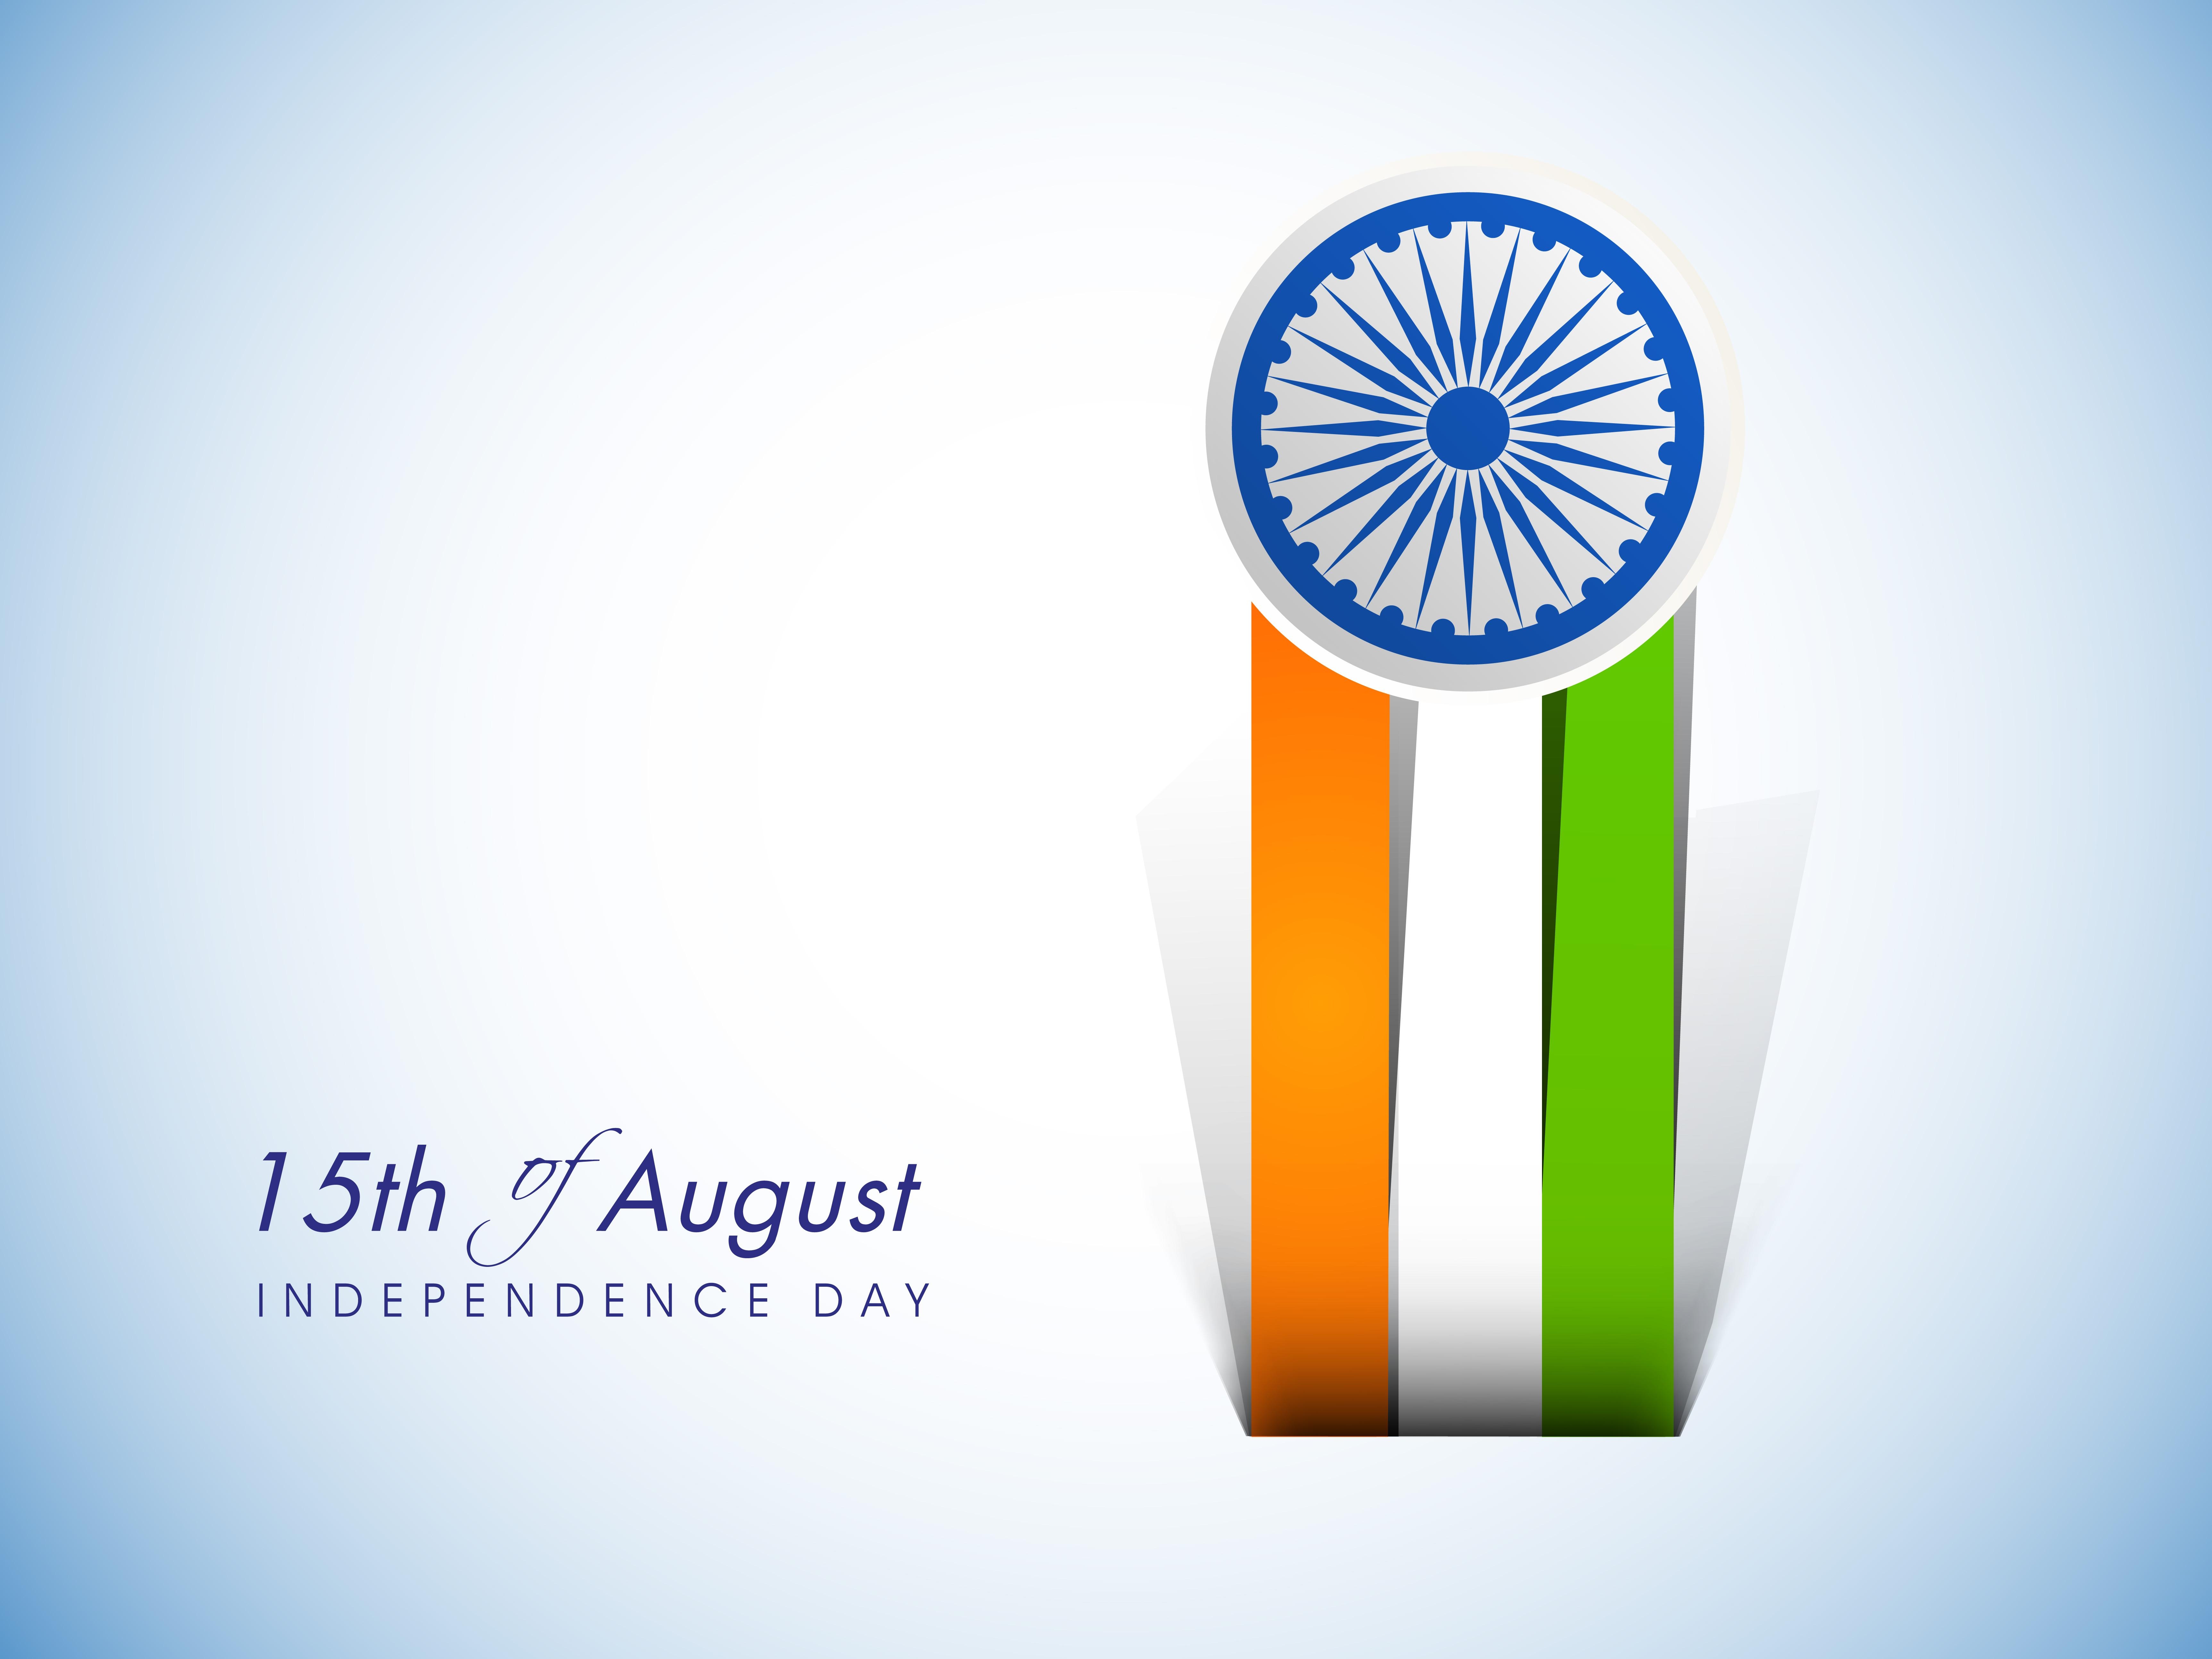 HD wallpaper, August 15Th, Tricolor, Independence Day, 5K, White Background, Red Fort, India, Indian Flag